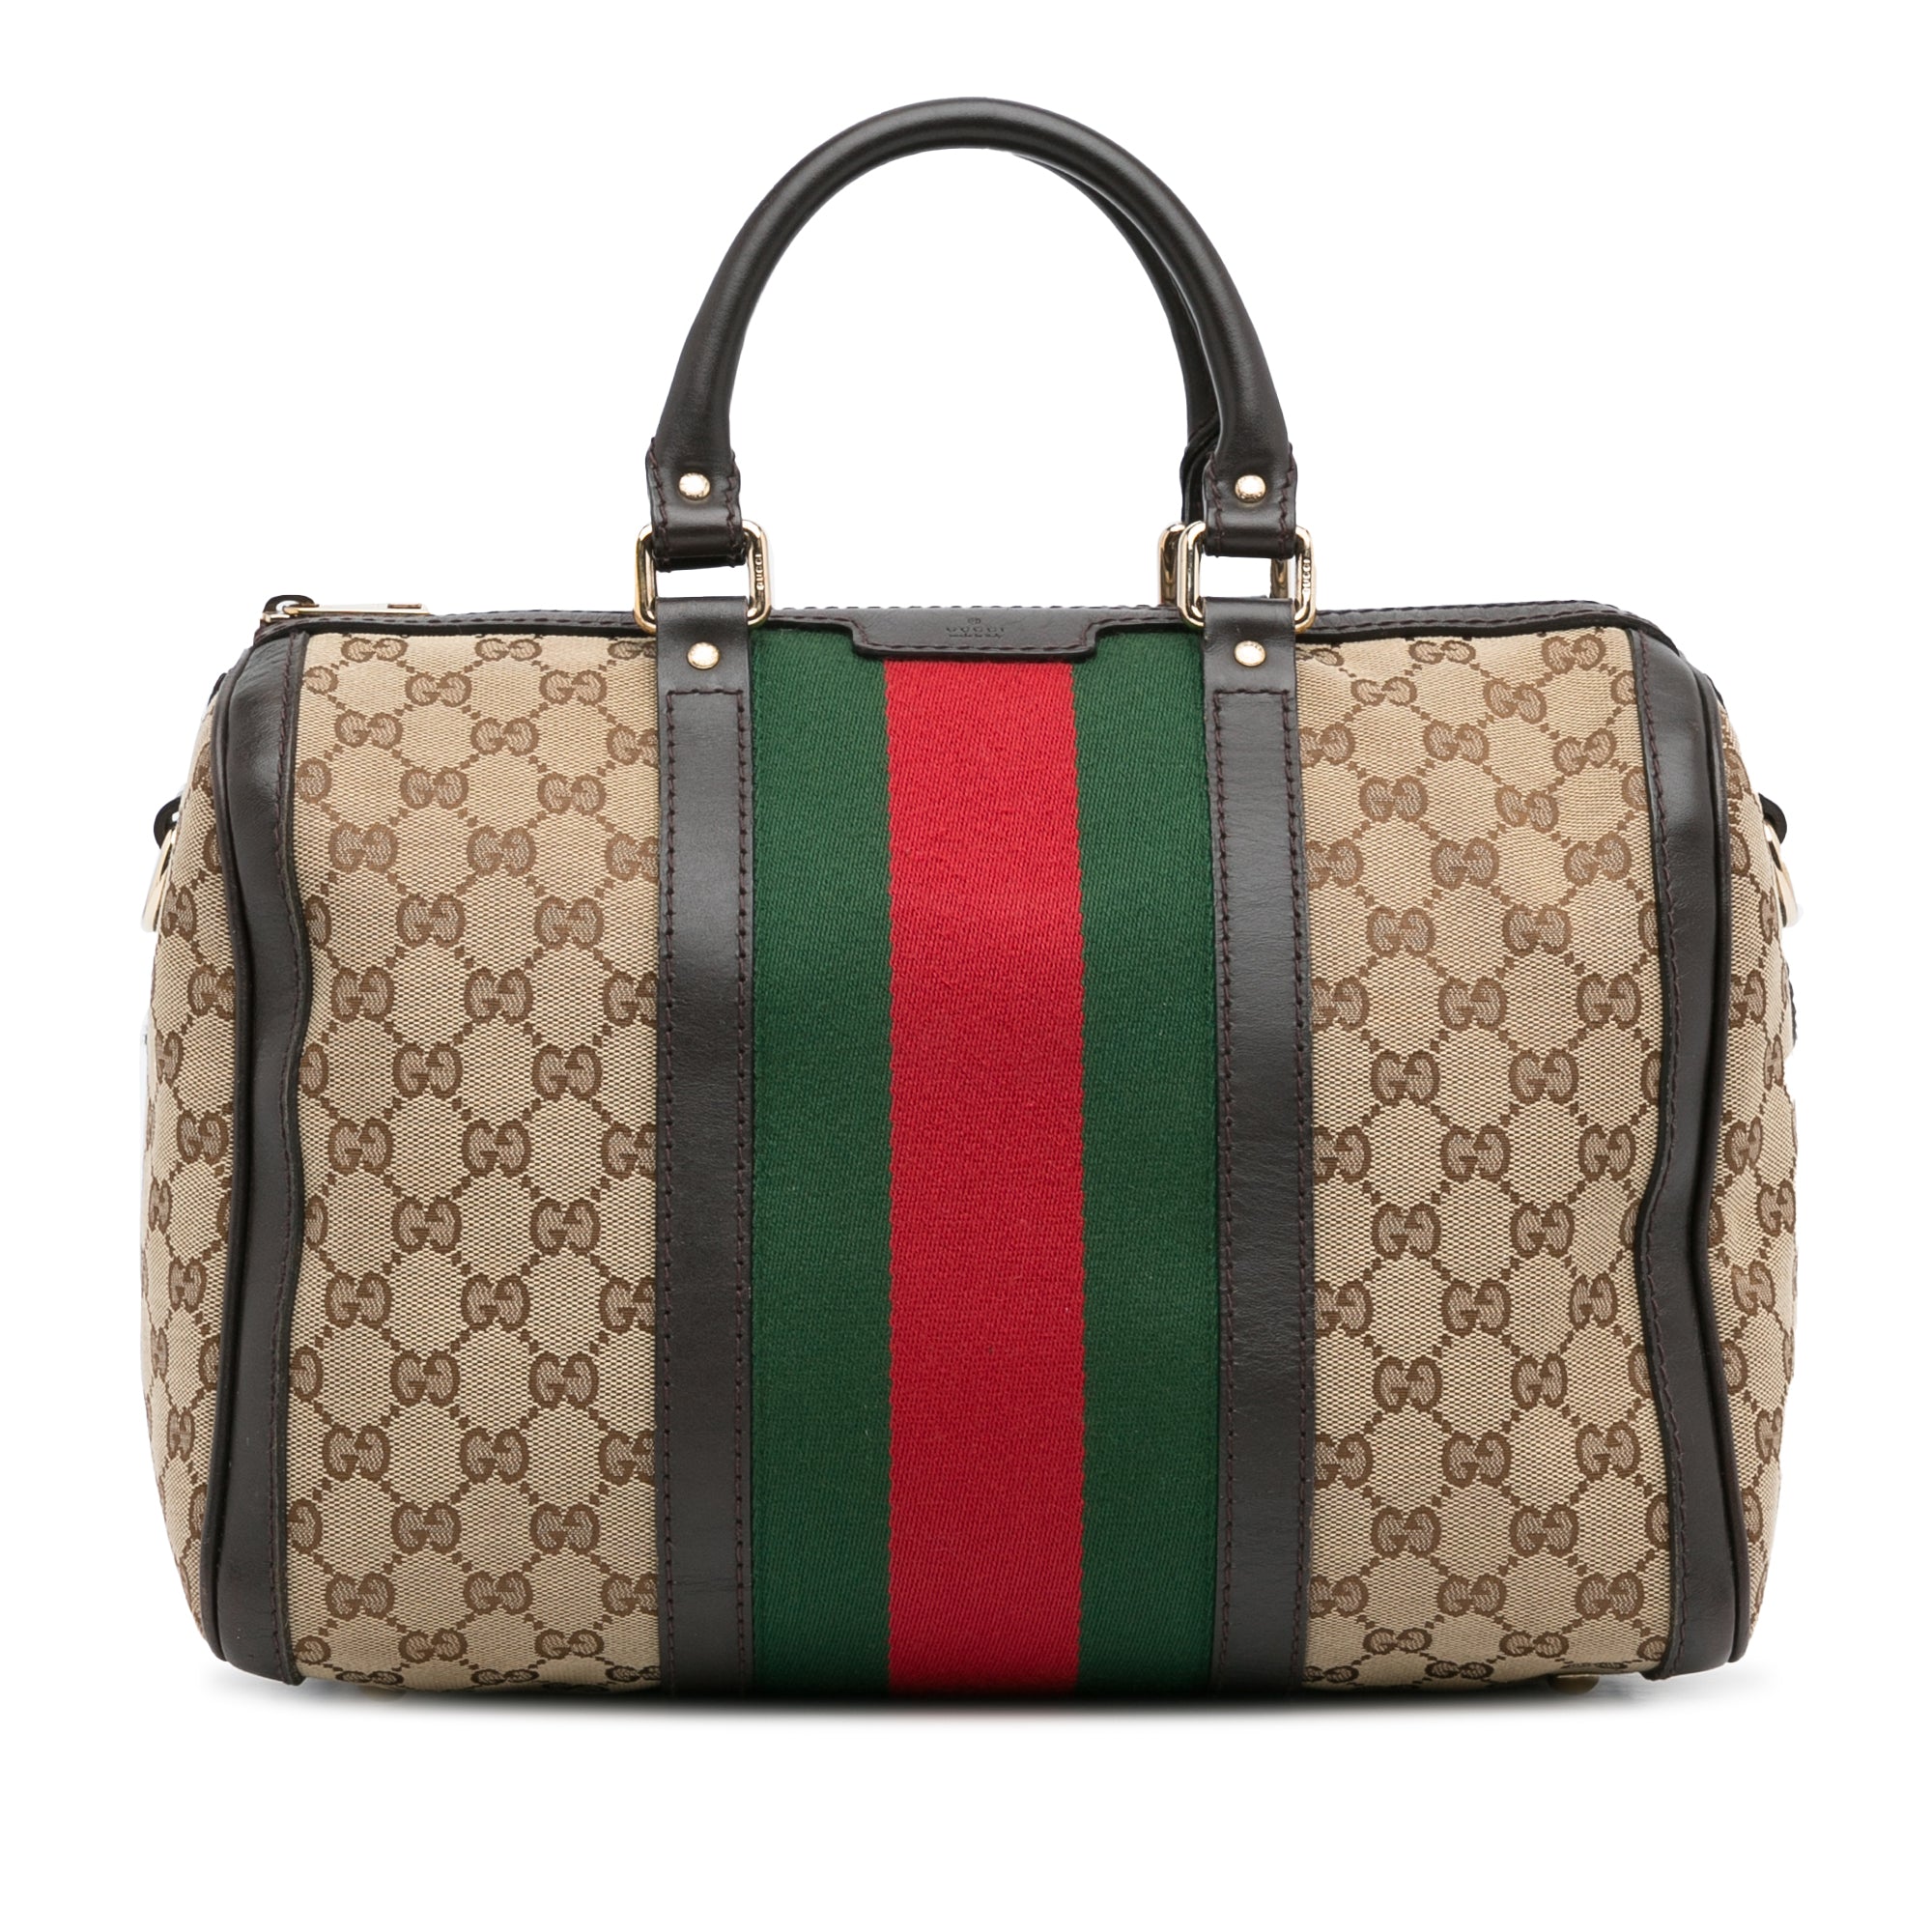 Authenticated Used GUCCI Old Gucci Vintage Travel Bag Boston